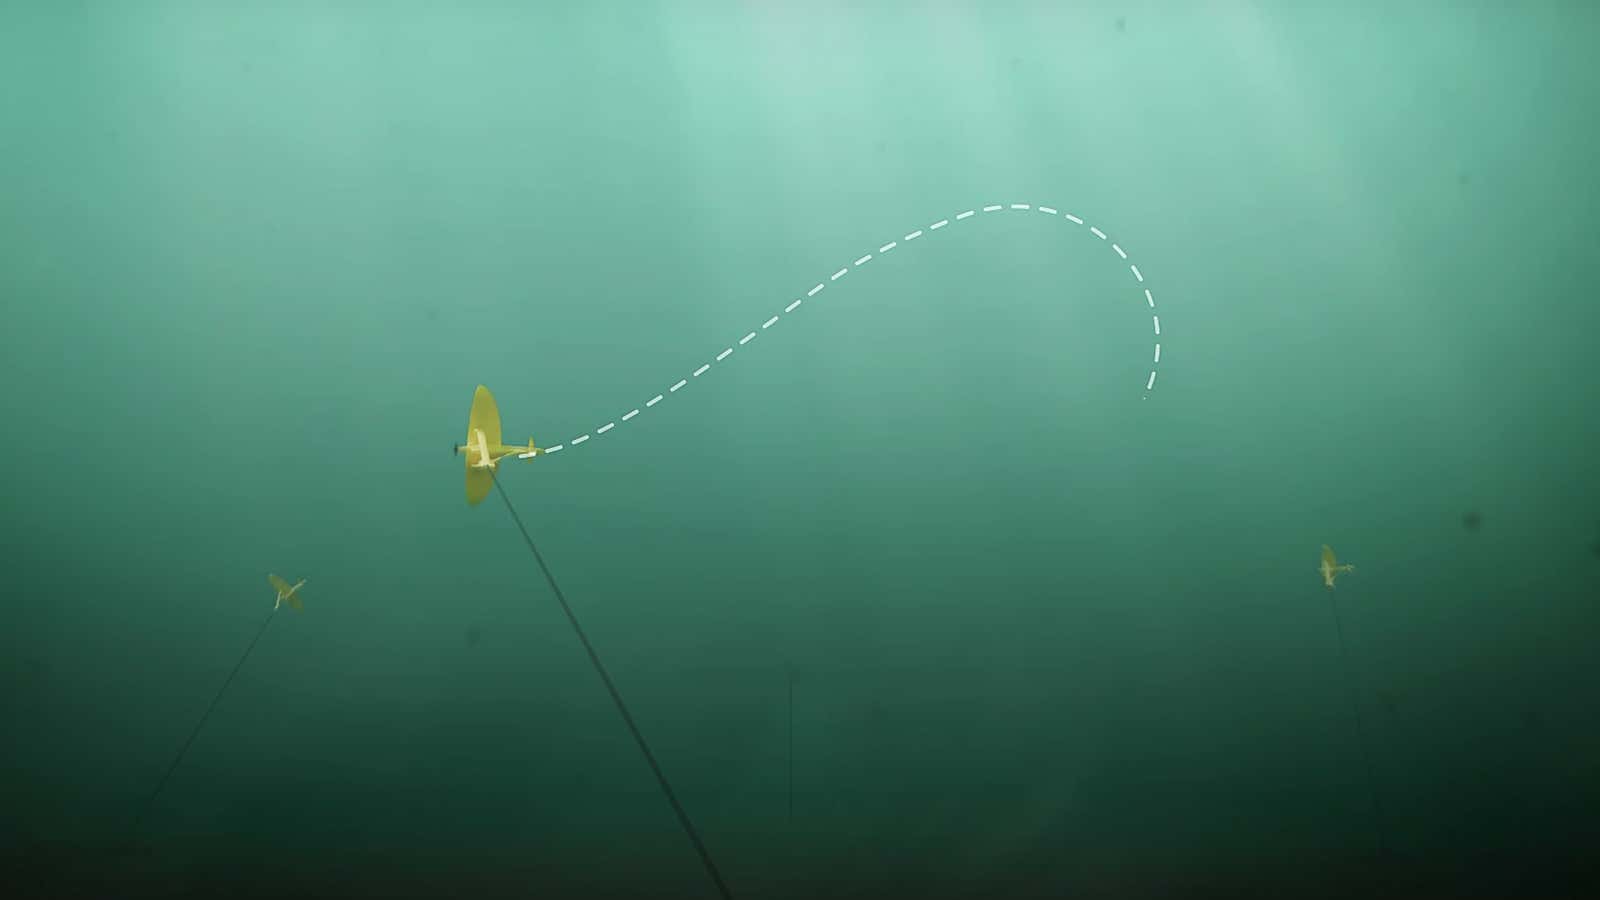 An illustration of a Minesto kite in action